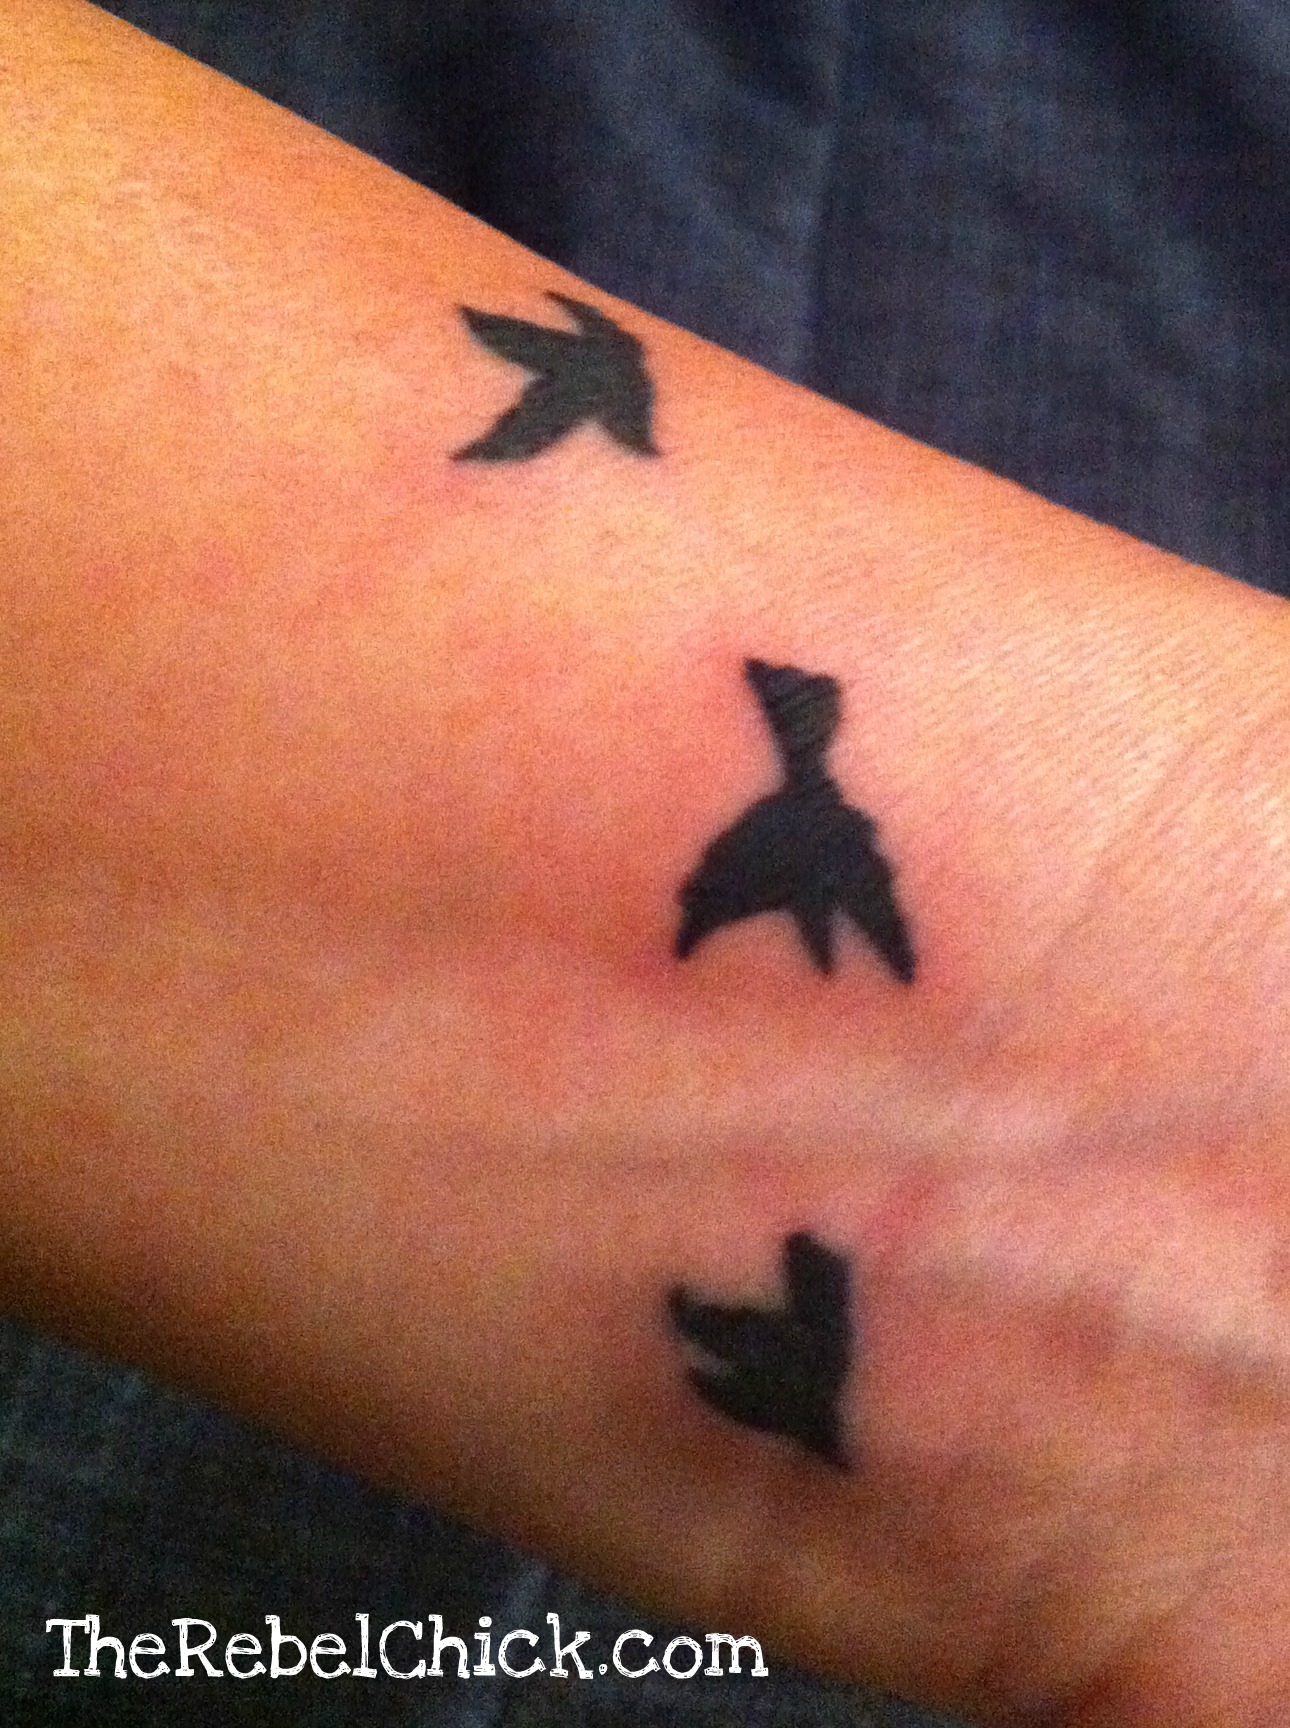 Lesson learned: don't get a tattoo in another country. - The Rebel Chick